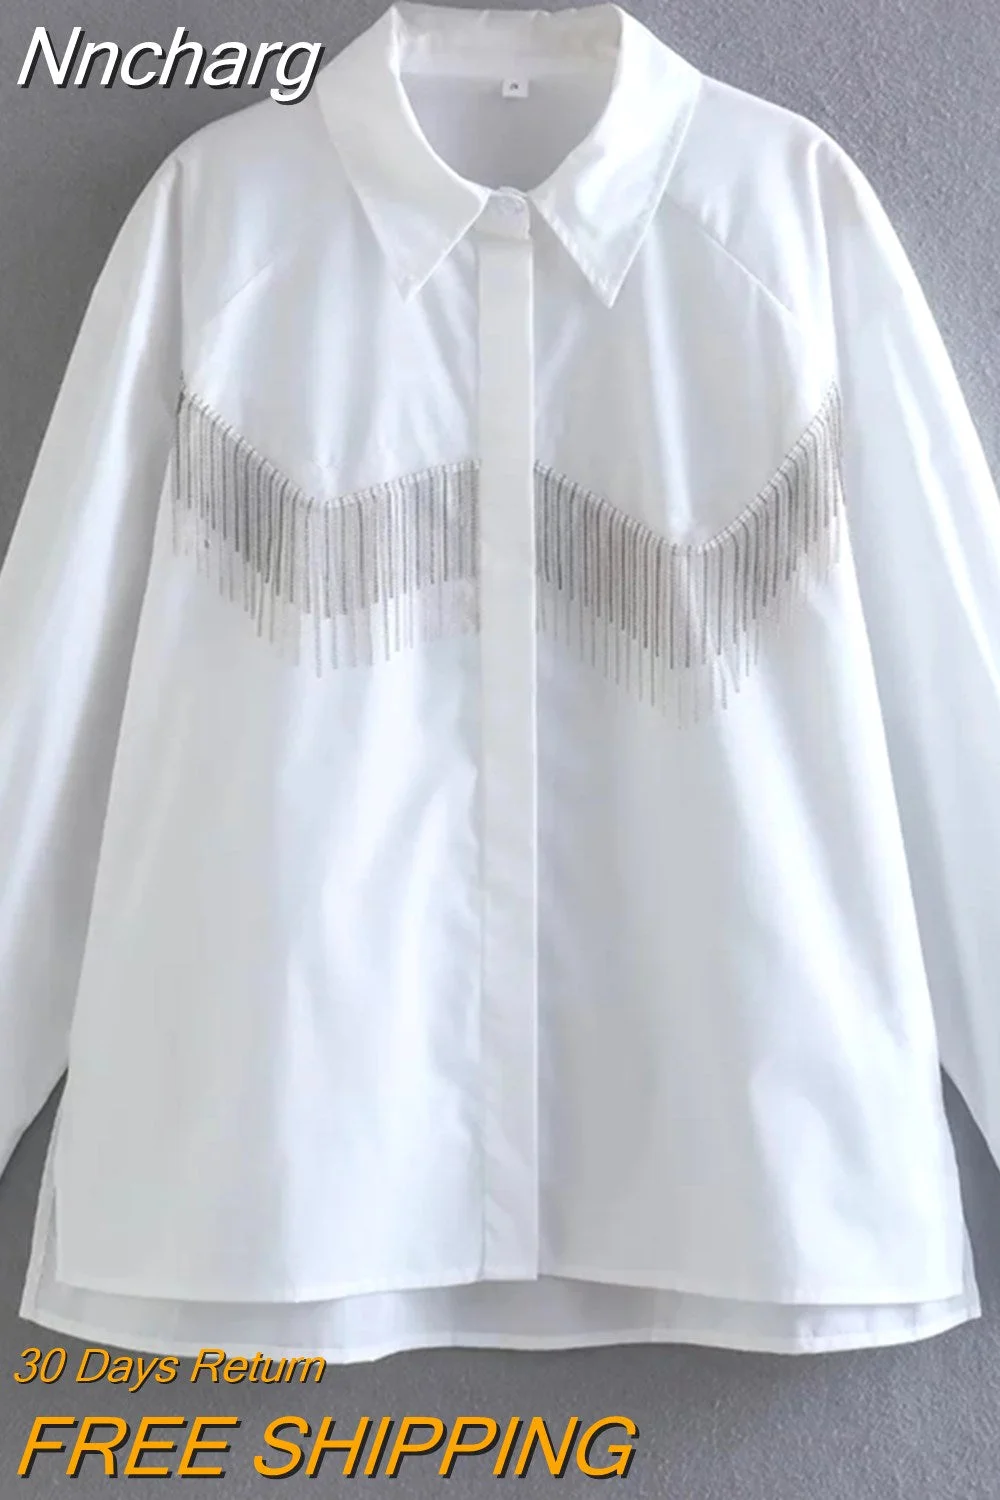 Nncharge & Blouses For Women Tassels Elegant And Youth Woman Blouses Summer Blouses Woman 2023 Oversized Chic Shirt Tops Zatra Top